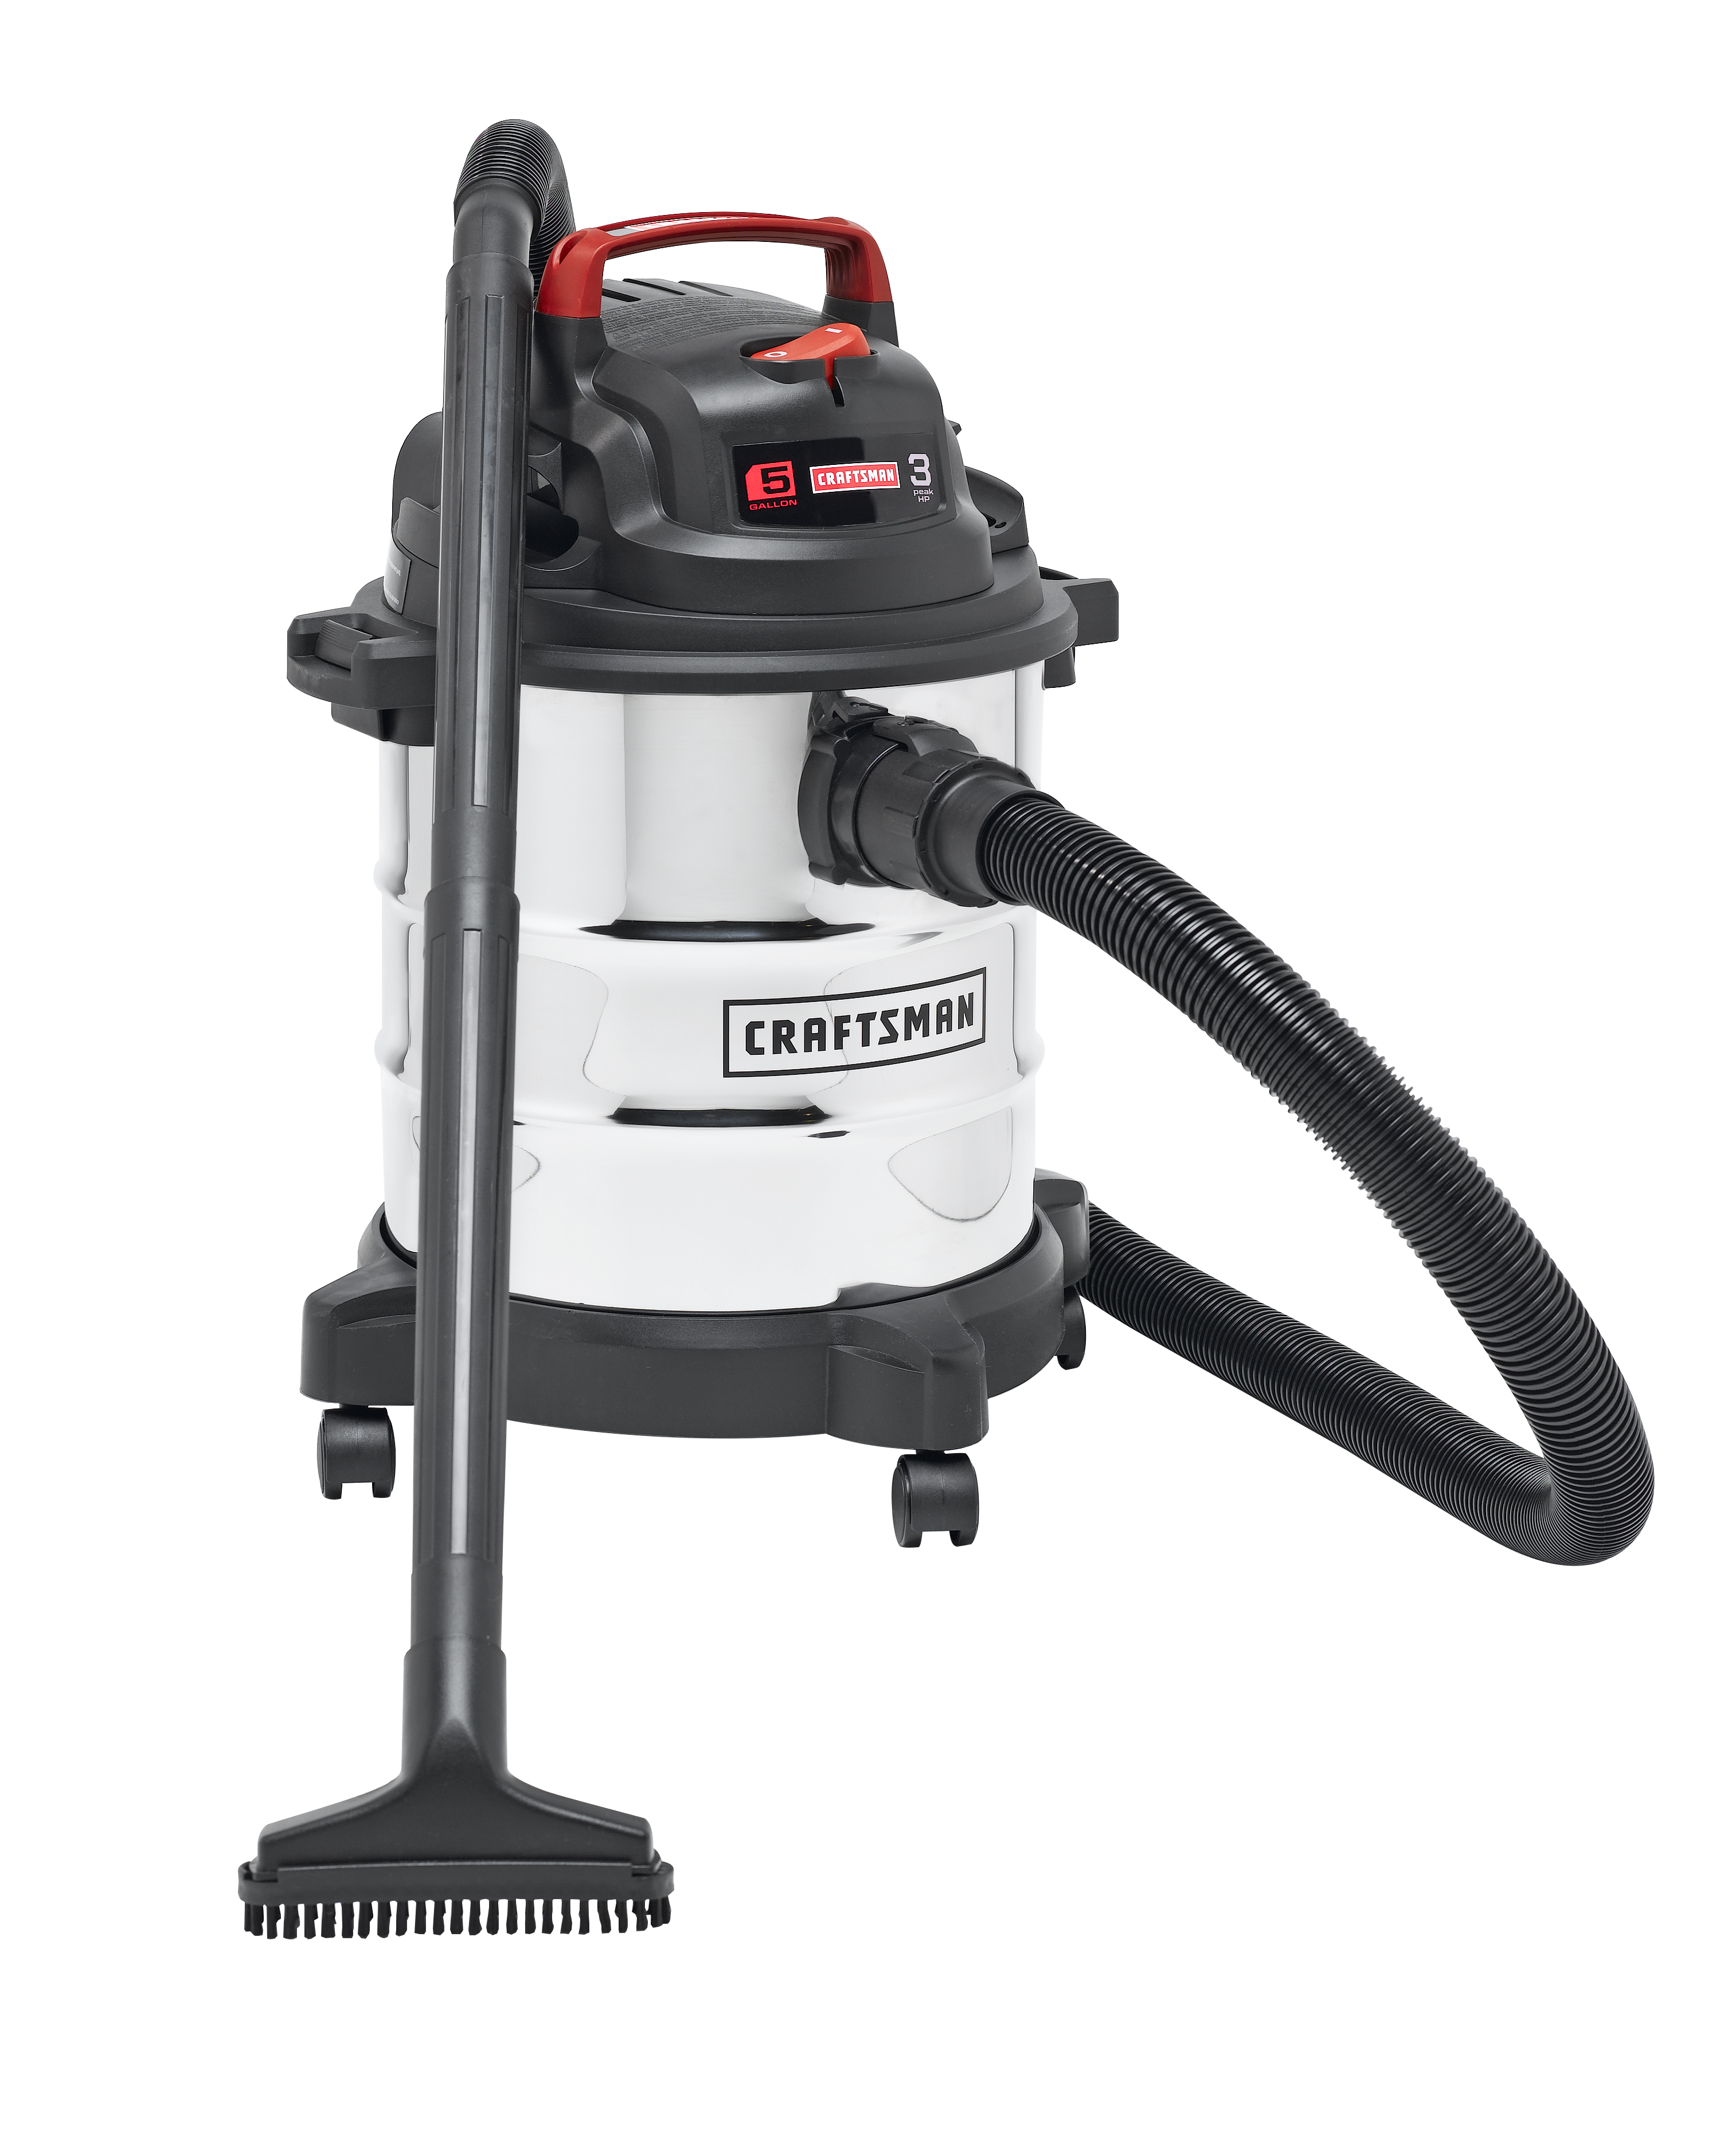 Craftsman 5 Gallon Stainless Steel Wet/dry Vac